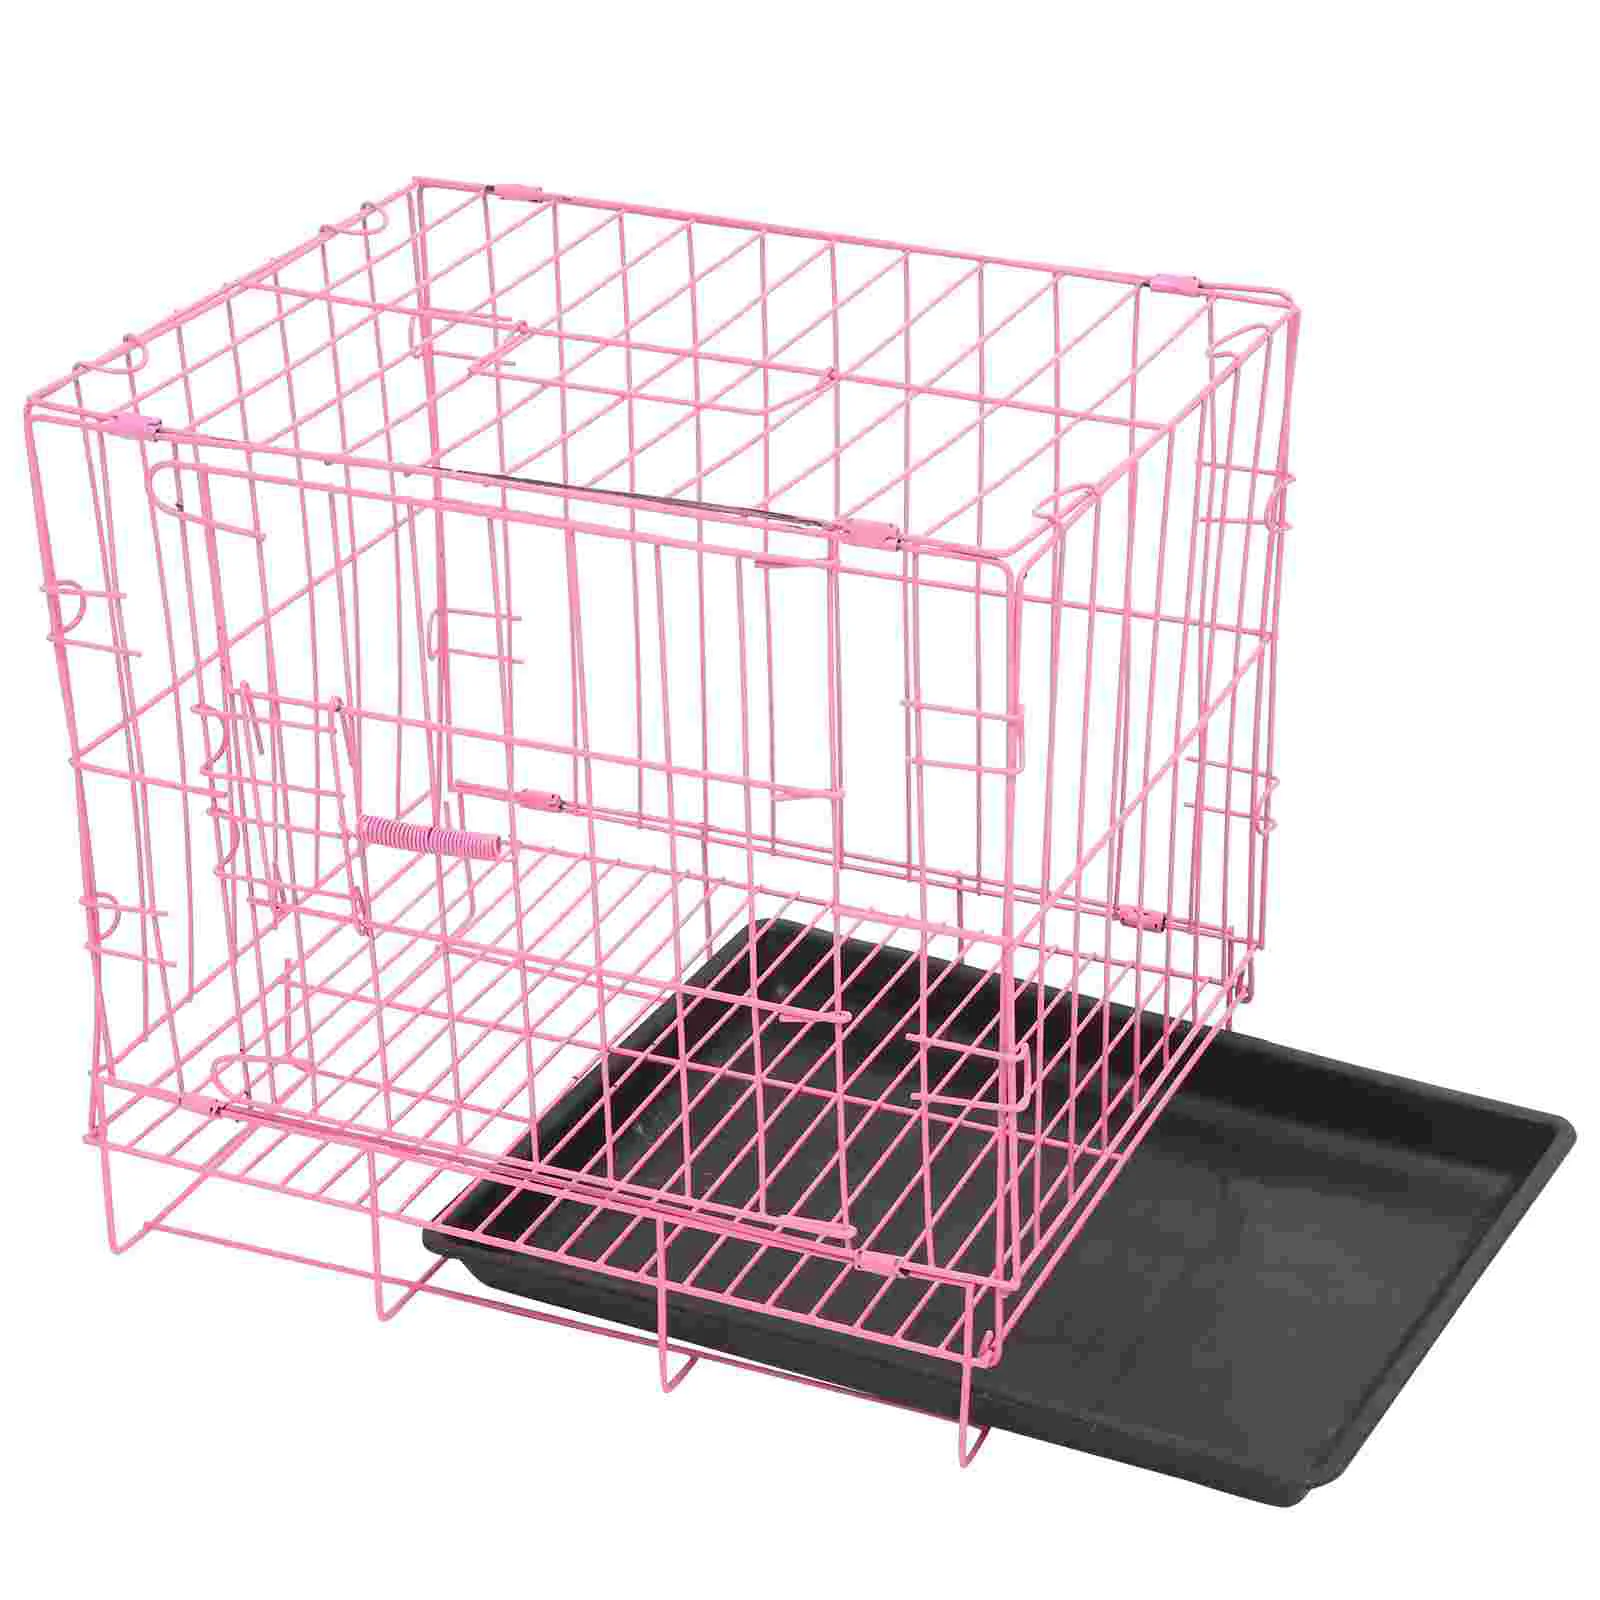 

Folding Small Crates Metal Crate- Wire Kennel with Removable Tray for Small and Medium Cat Rabbit Indoor Crates, Houses& Pens